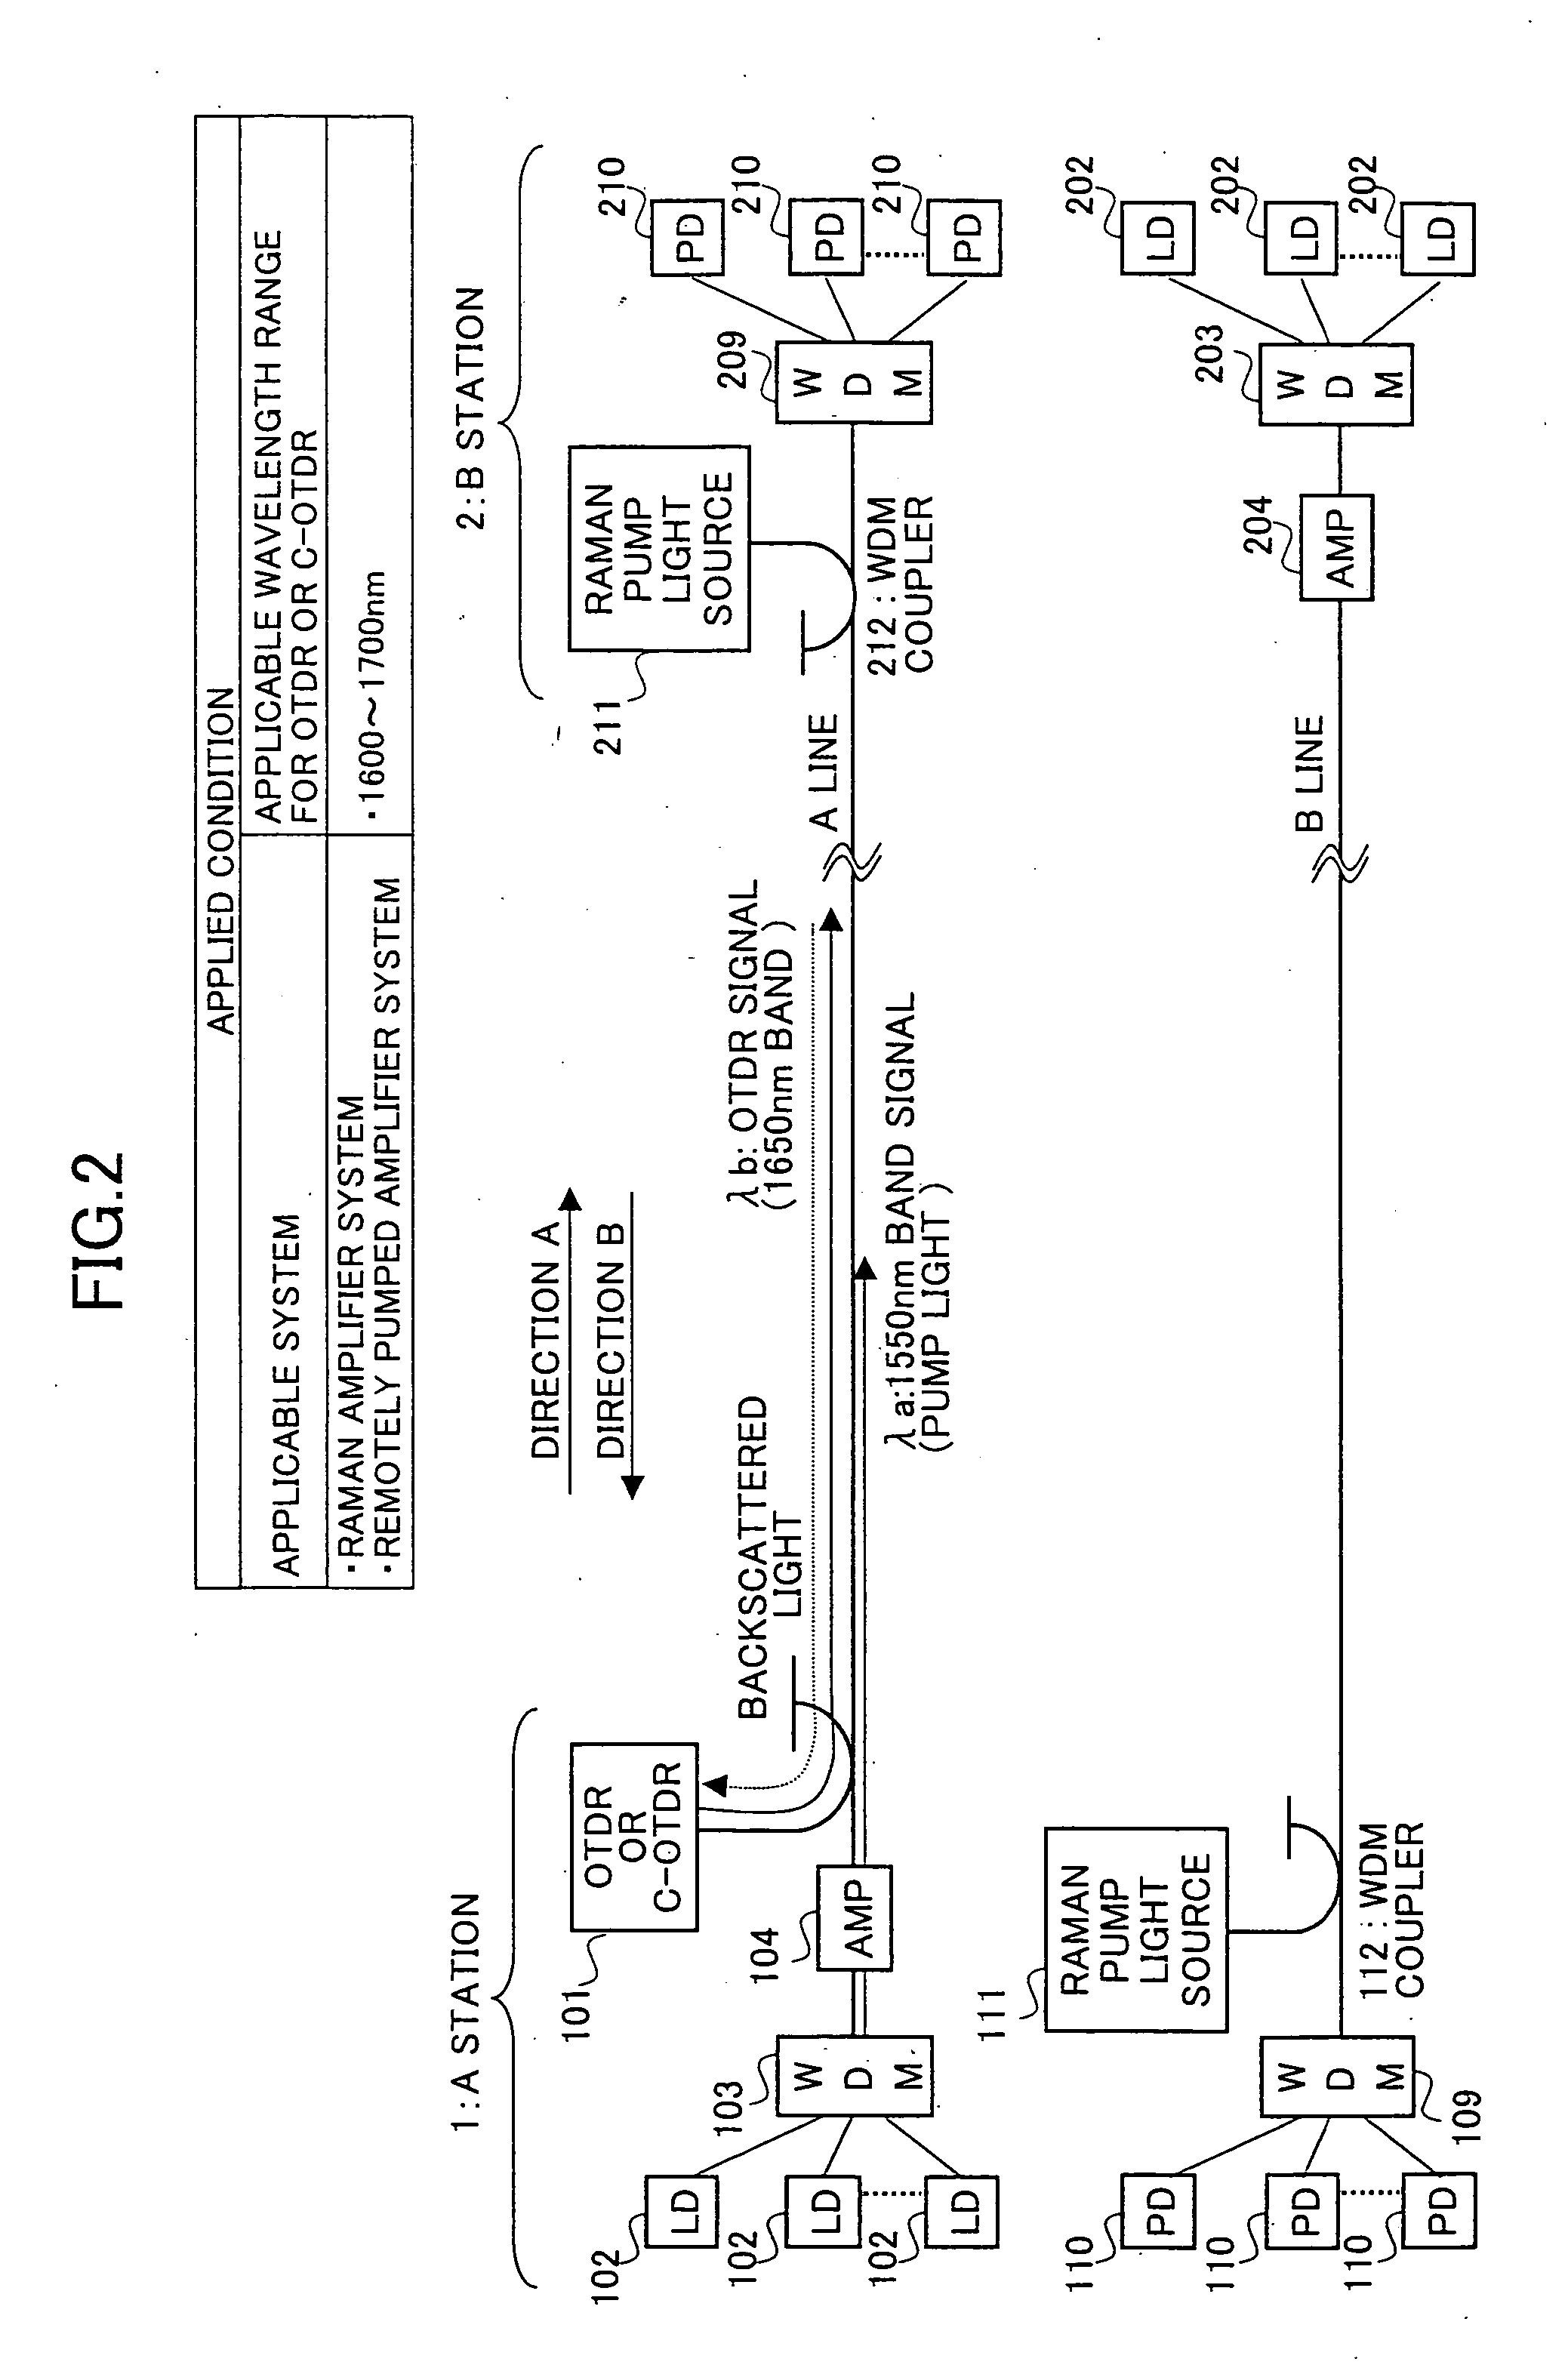 Measurement method by OTDR and terminal station apparatus